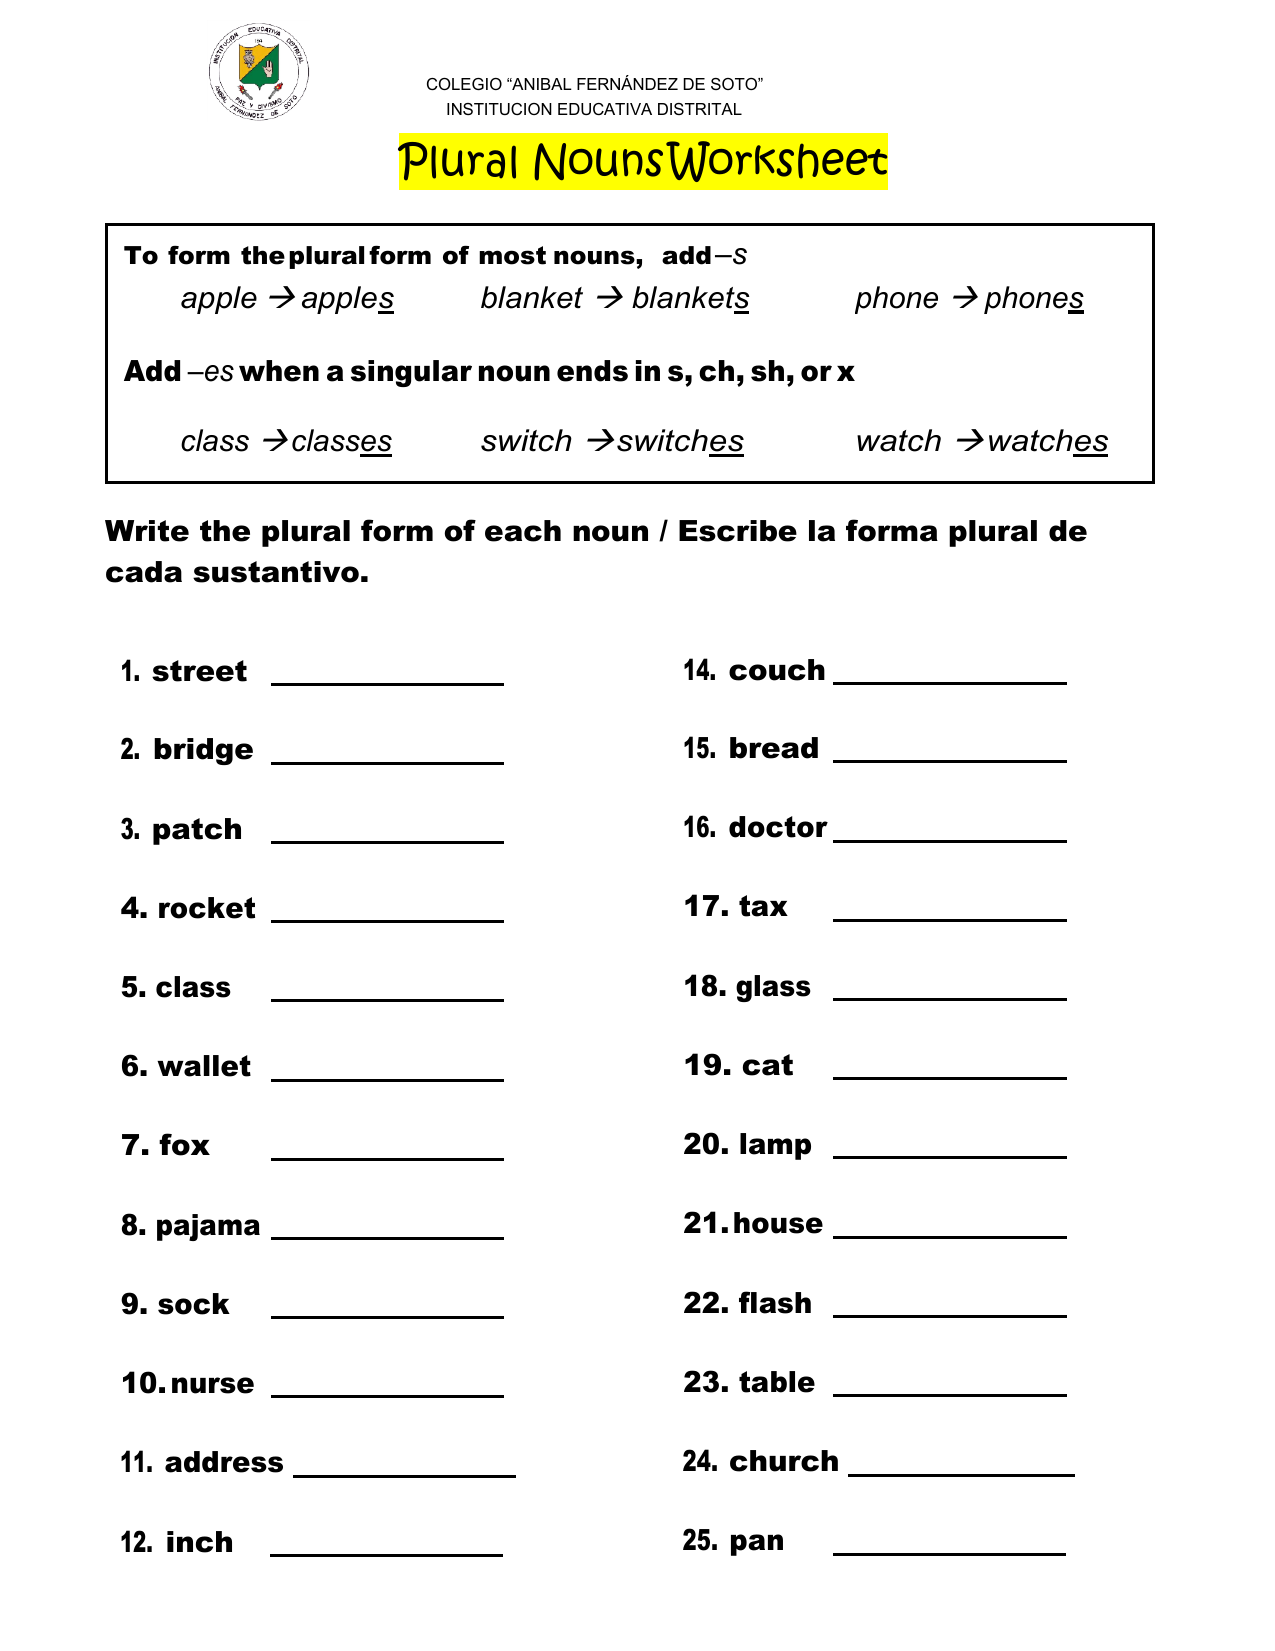 Free Printable Worksheets On Forming Plurals Of Nouns Printable Forms 